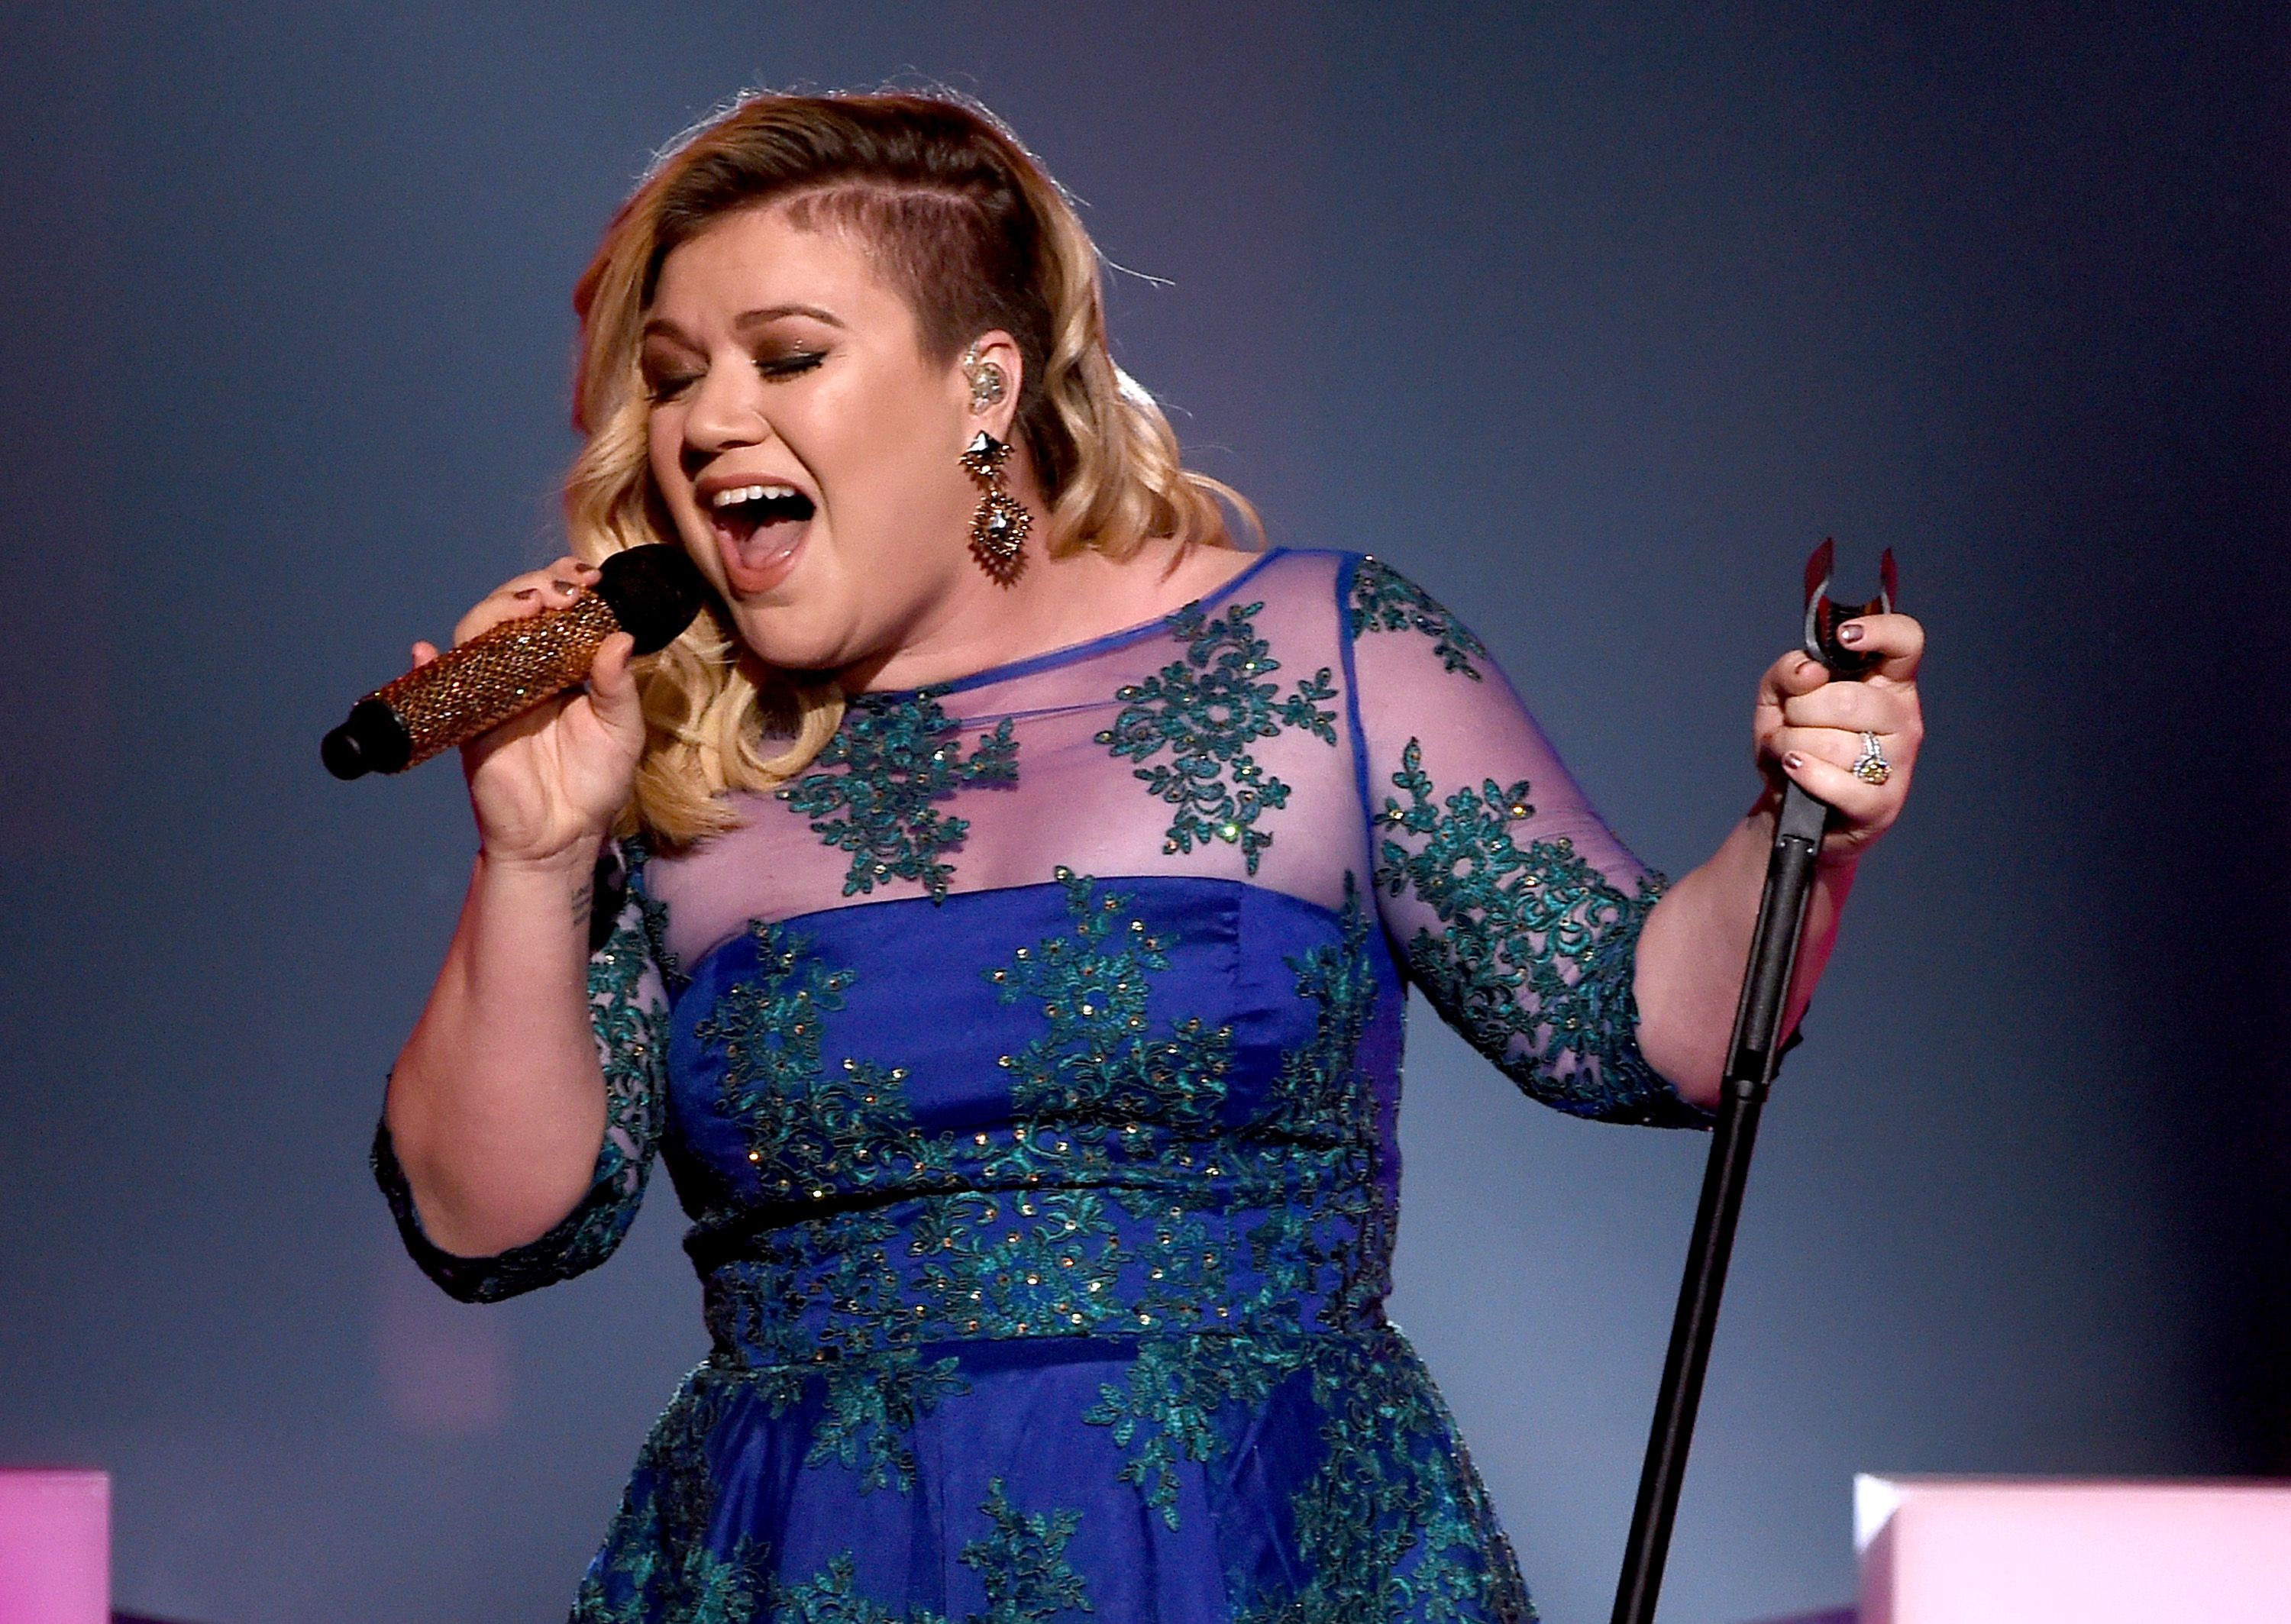 Singer Kelly Clarkson performs 'Heartbeat Song' onstage at the 2015 iHeartRadio Music Awards on The Shrine Auditorium on March 29, 2015 | Photo Getty Images